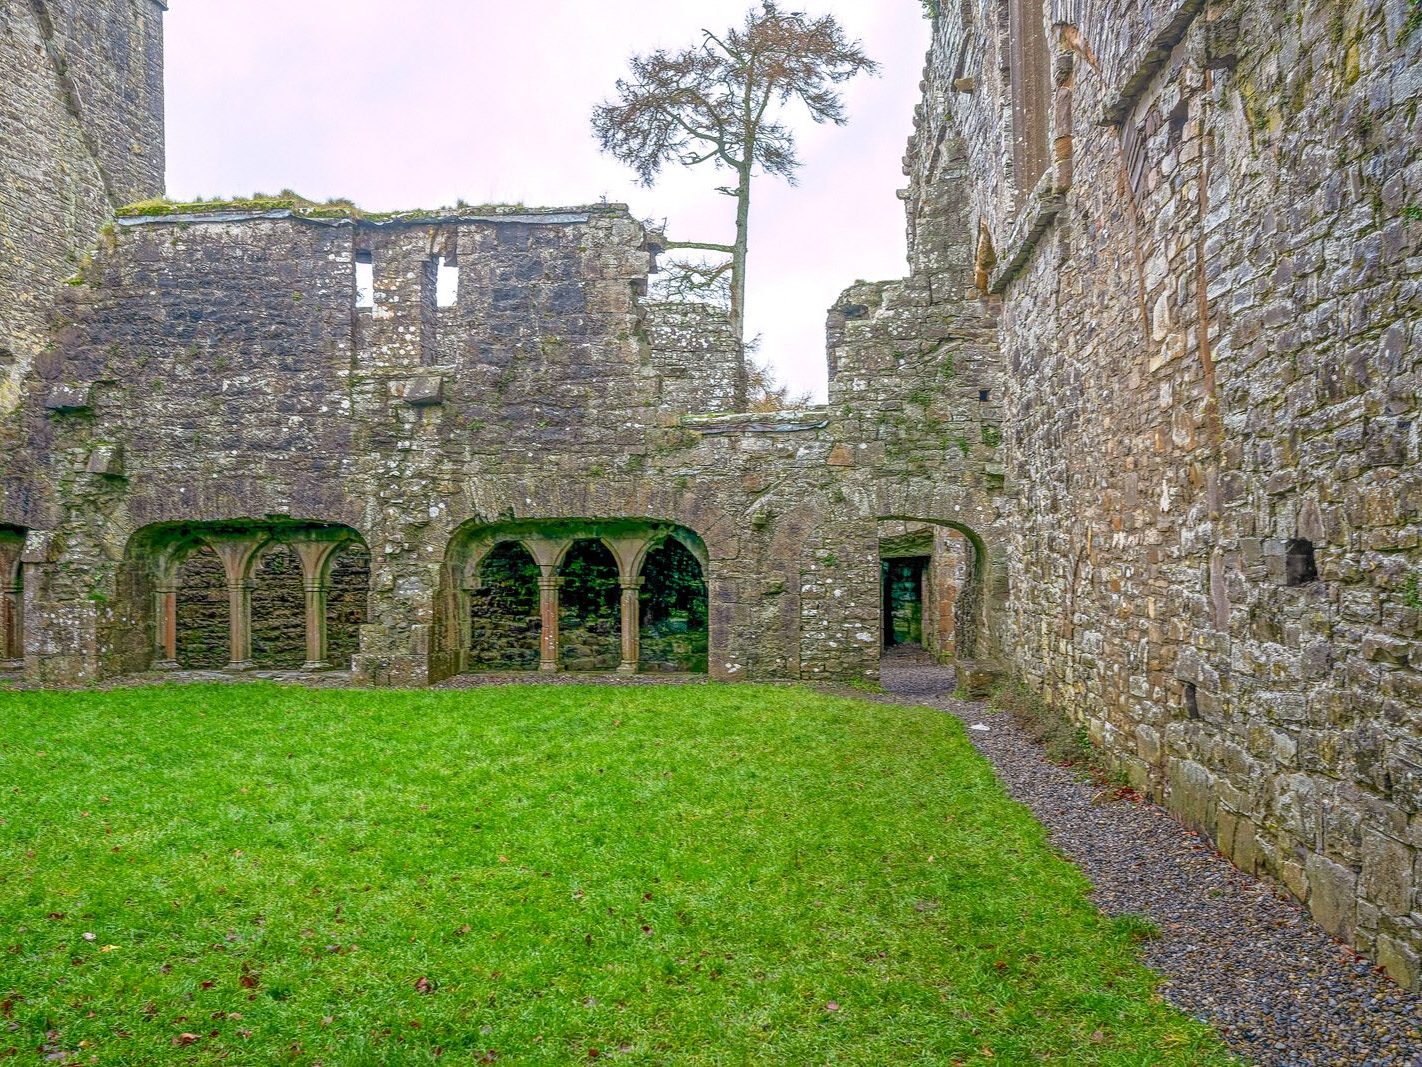 BECTIVE ABBEY WHICH I VISITED LAST CHRISTMAS [THERE WERE NO OTHER VISITORS AS IT WAS A VERY WET DAY]--225243-1